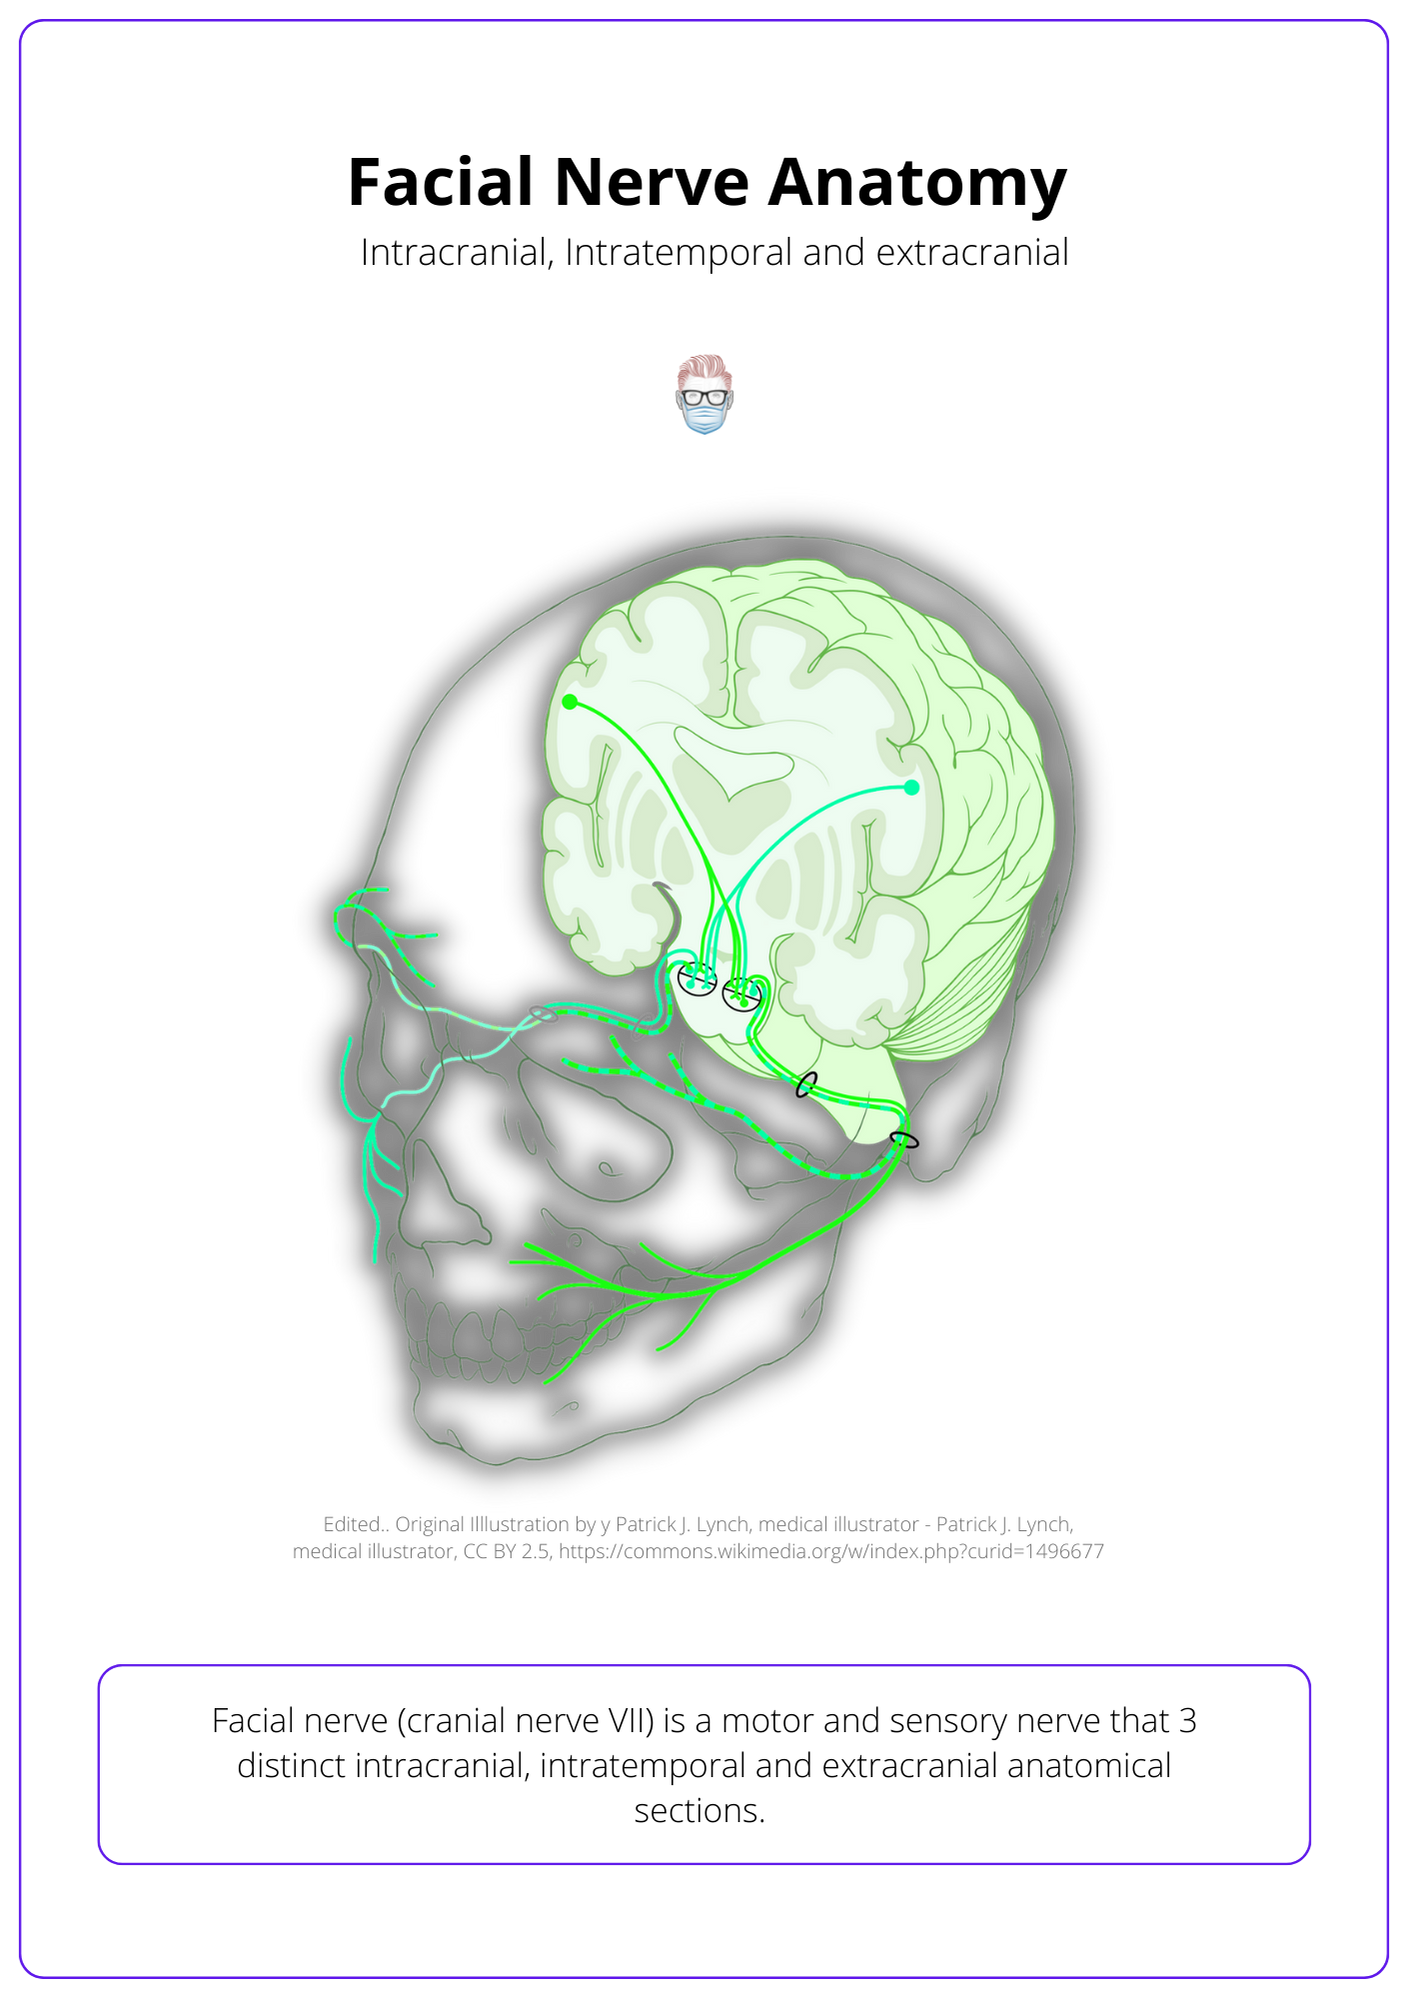 An illustrated diagram showing the facial nerve in yellow travel through its intracranial, extracranial and intratemporal anatomical sections